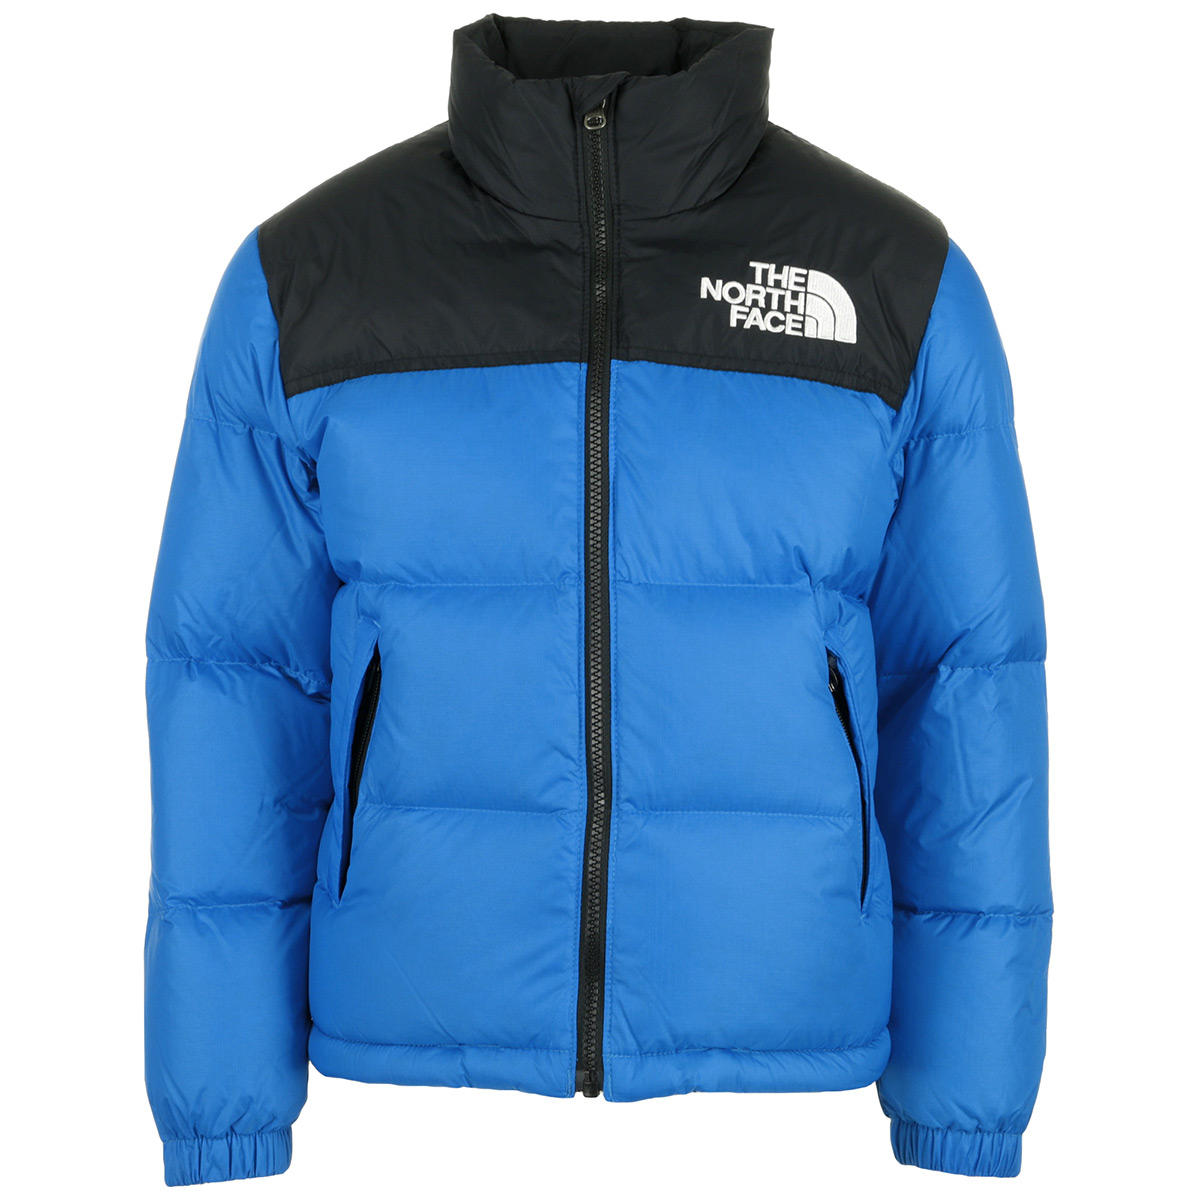 the north face jacket kids